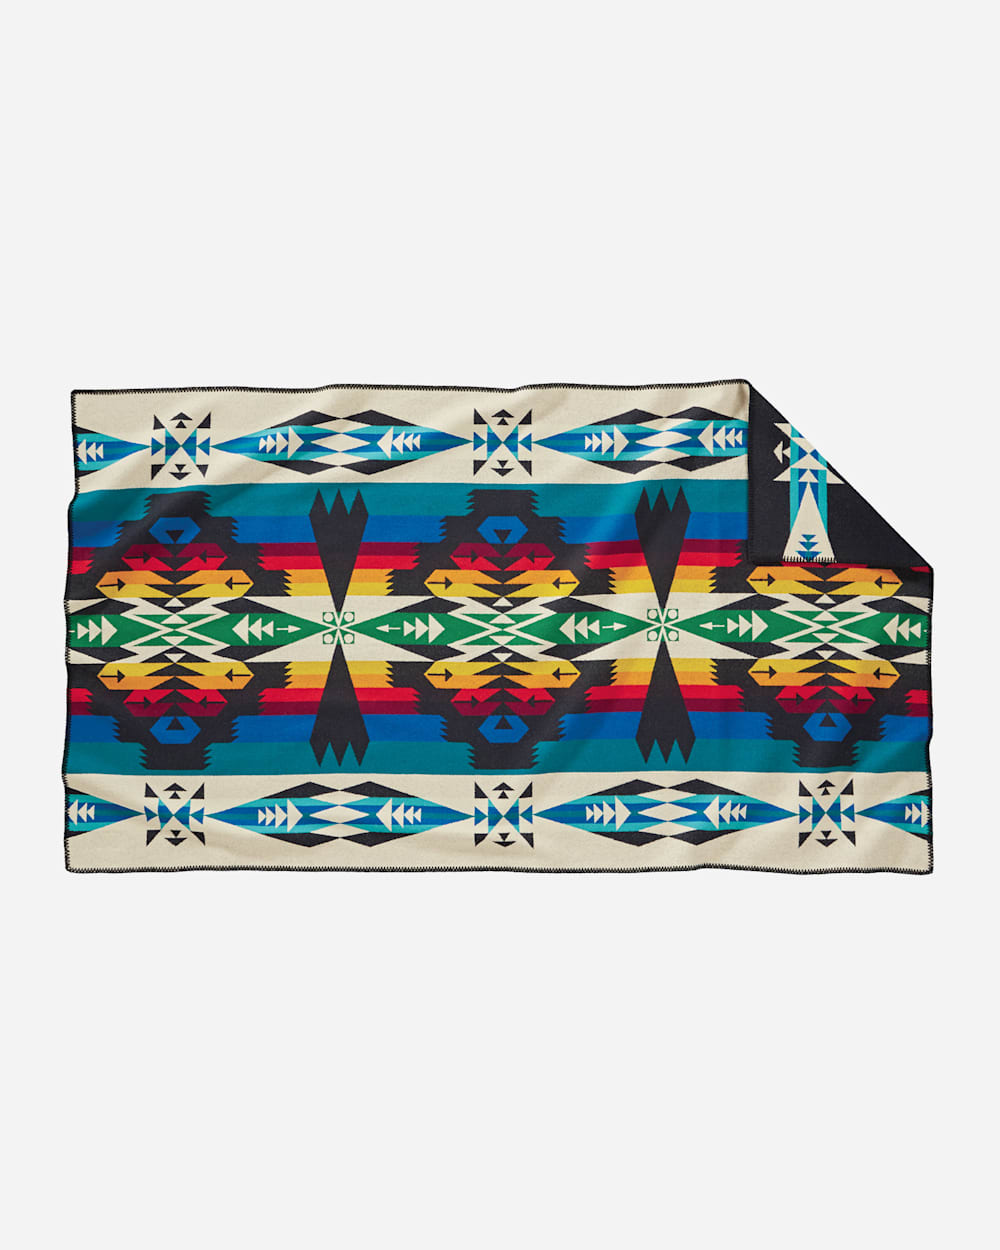 ADDITIONAL VIEW OF TUCSON SADDLE BLANKET IN BLACK image number 2